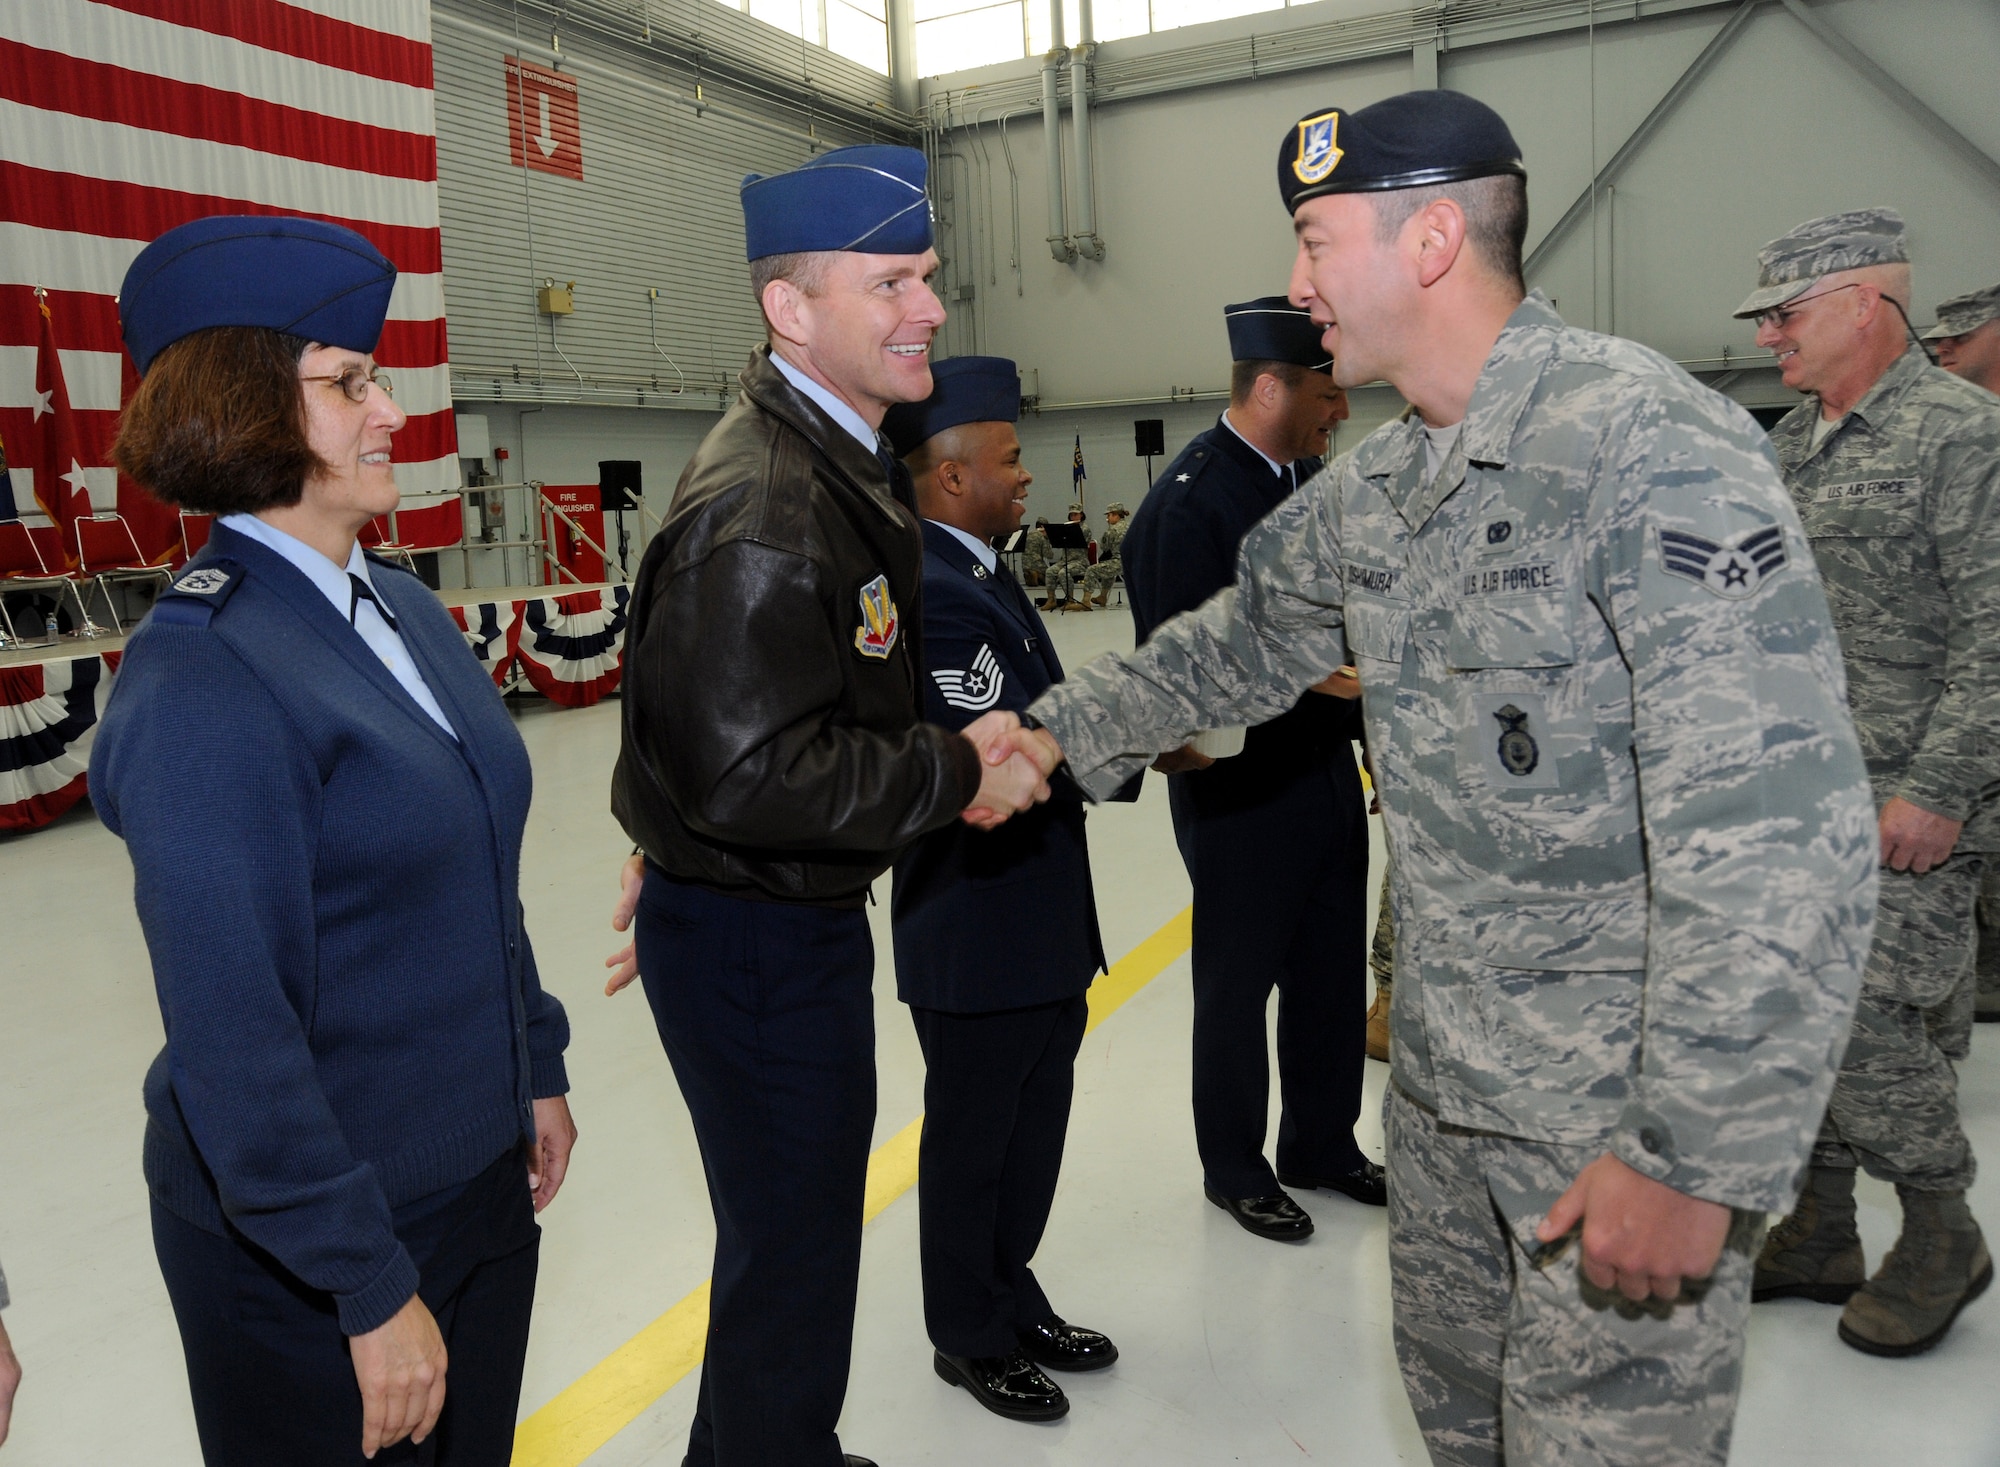 Col. Rick Wedan, 142nd Fighter Wing Commander, center left, along with Chief Master Sgt. Julie Eddings, 142nd Fighter Wing Command Chief, left, greet Airmen from the 142nd Fighter Wing Civil Engineer Squadron and Security Forces Squadron after the formal Demobilization Ceremony at the Portland Air National Guard Base, Ore., Dec. 7, 2014. (U.S. Air National Guard photo by Tech. Sgt. John Hughel, 142nd Fighter Wing Public Affairs/Released)